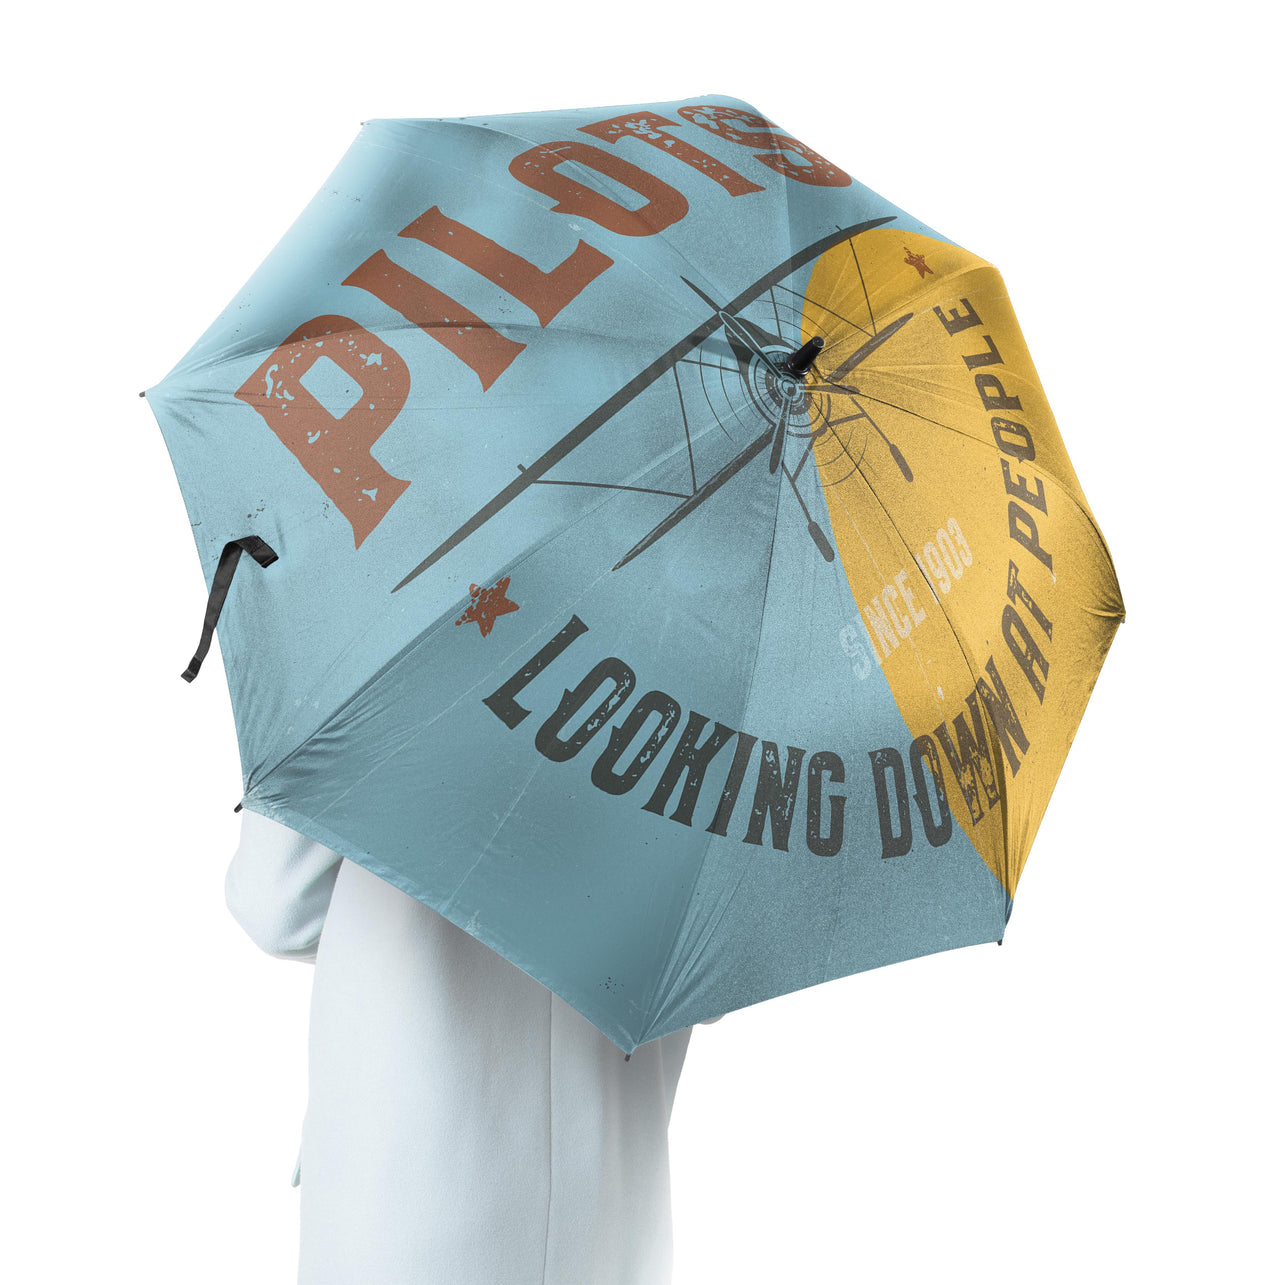 Pilots Looking Down at People Since 1903 Designed Umbrella